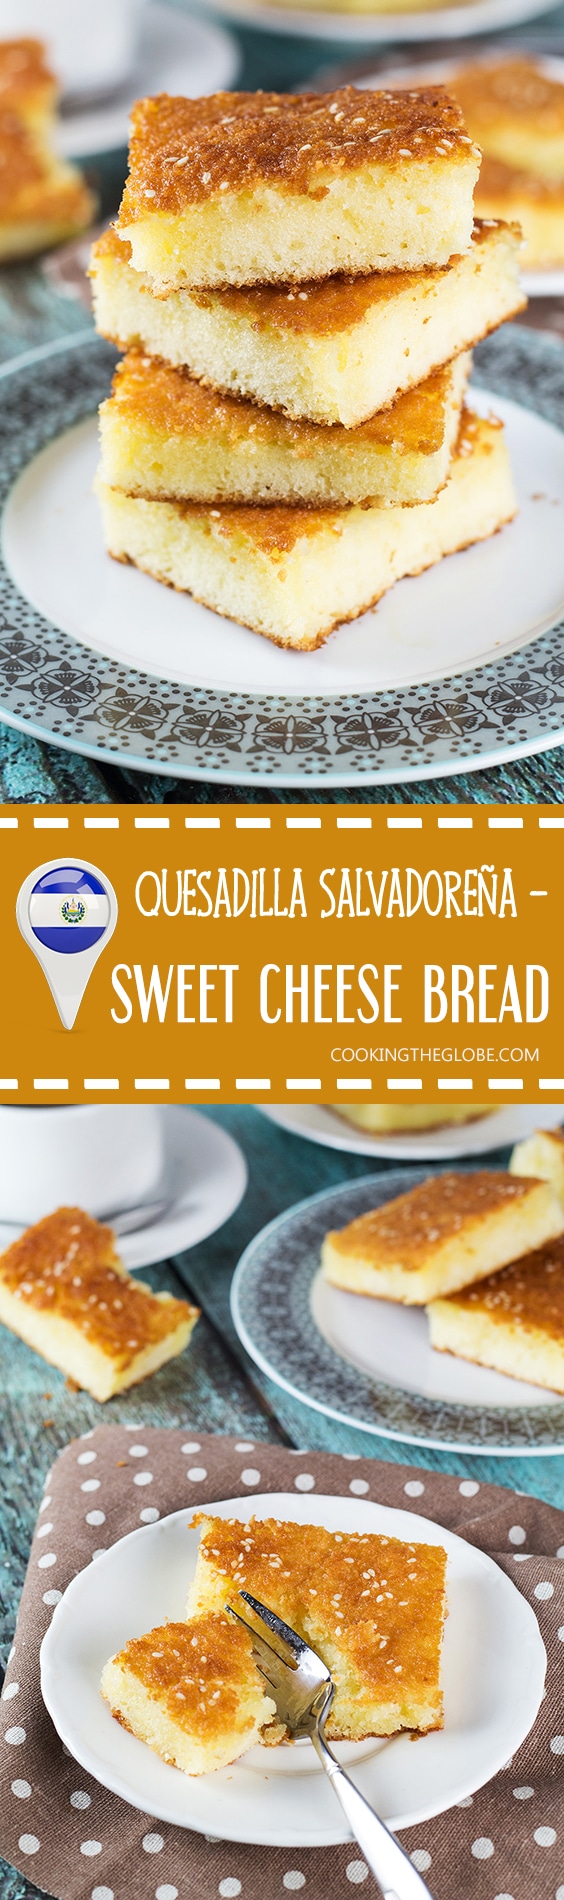 Quesadilla Salvadoreña is not your ordinary quesadilla. This one is a dessert! A rich and crazy delicious sweet cheese bread / pound cake from El Salvador. So good! | cookingtheglobe.com